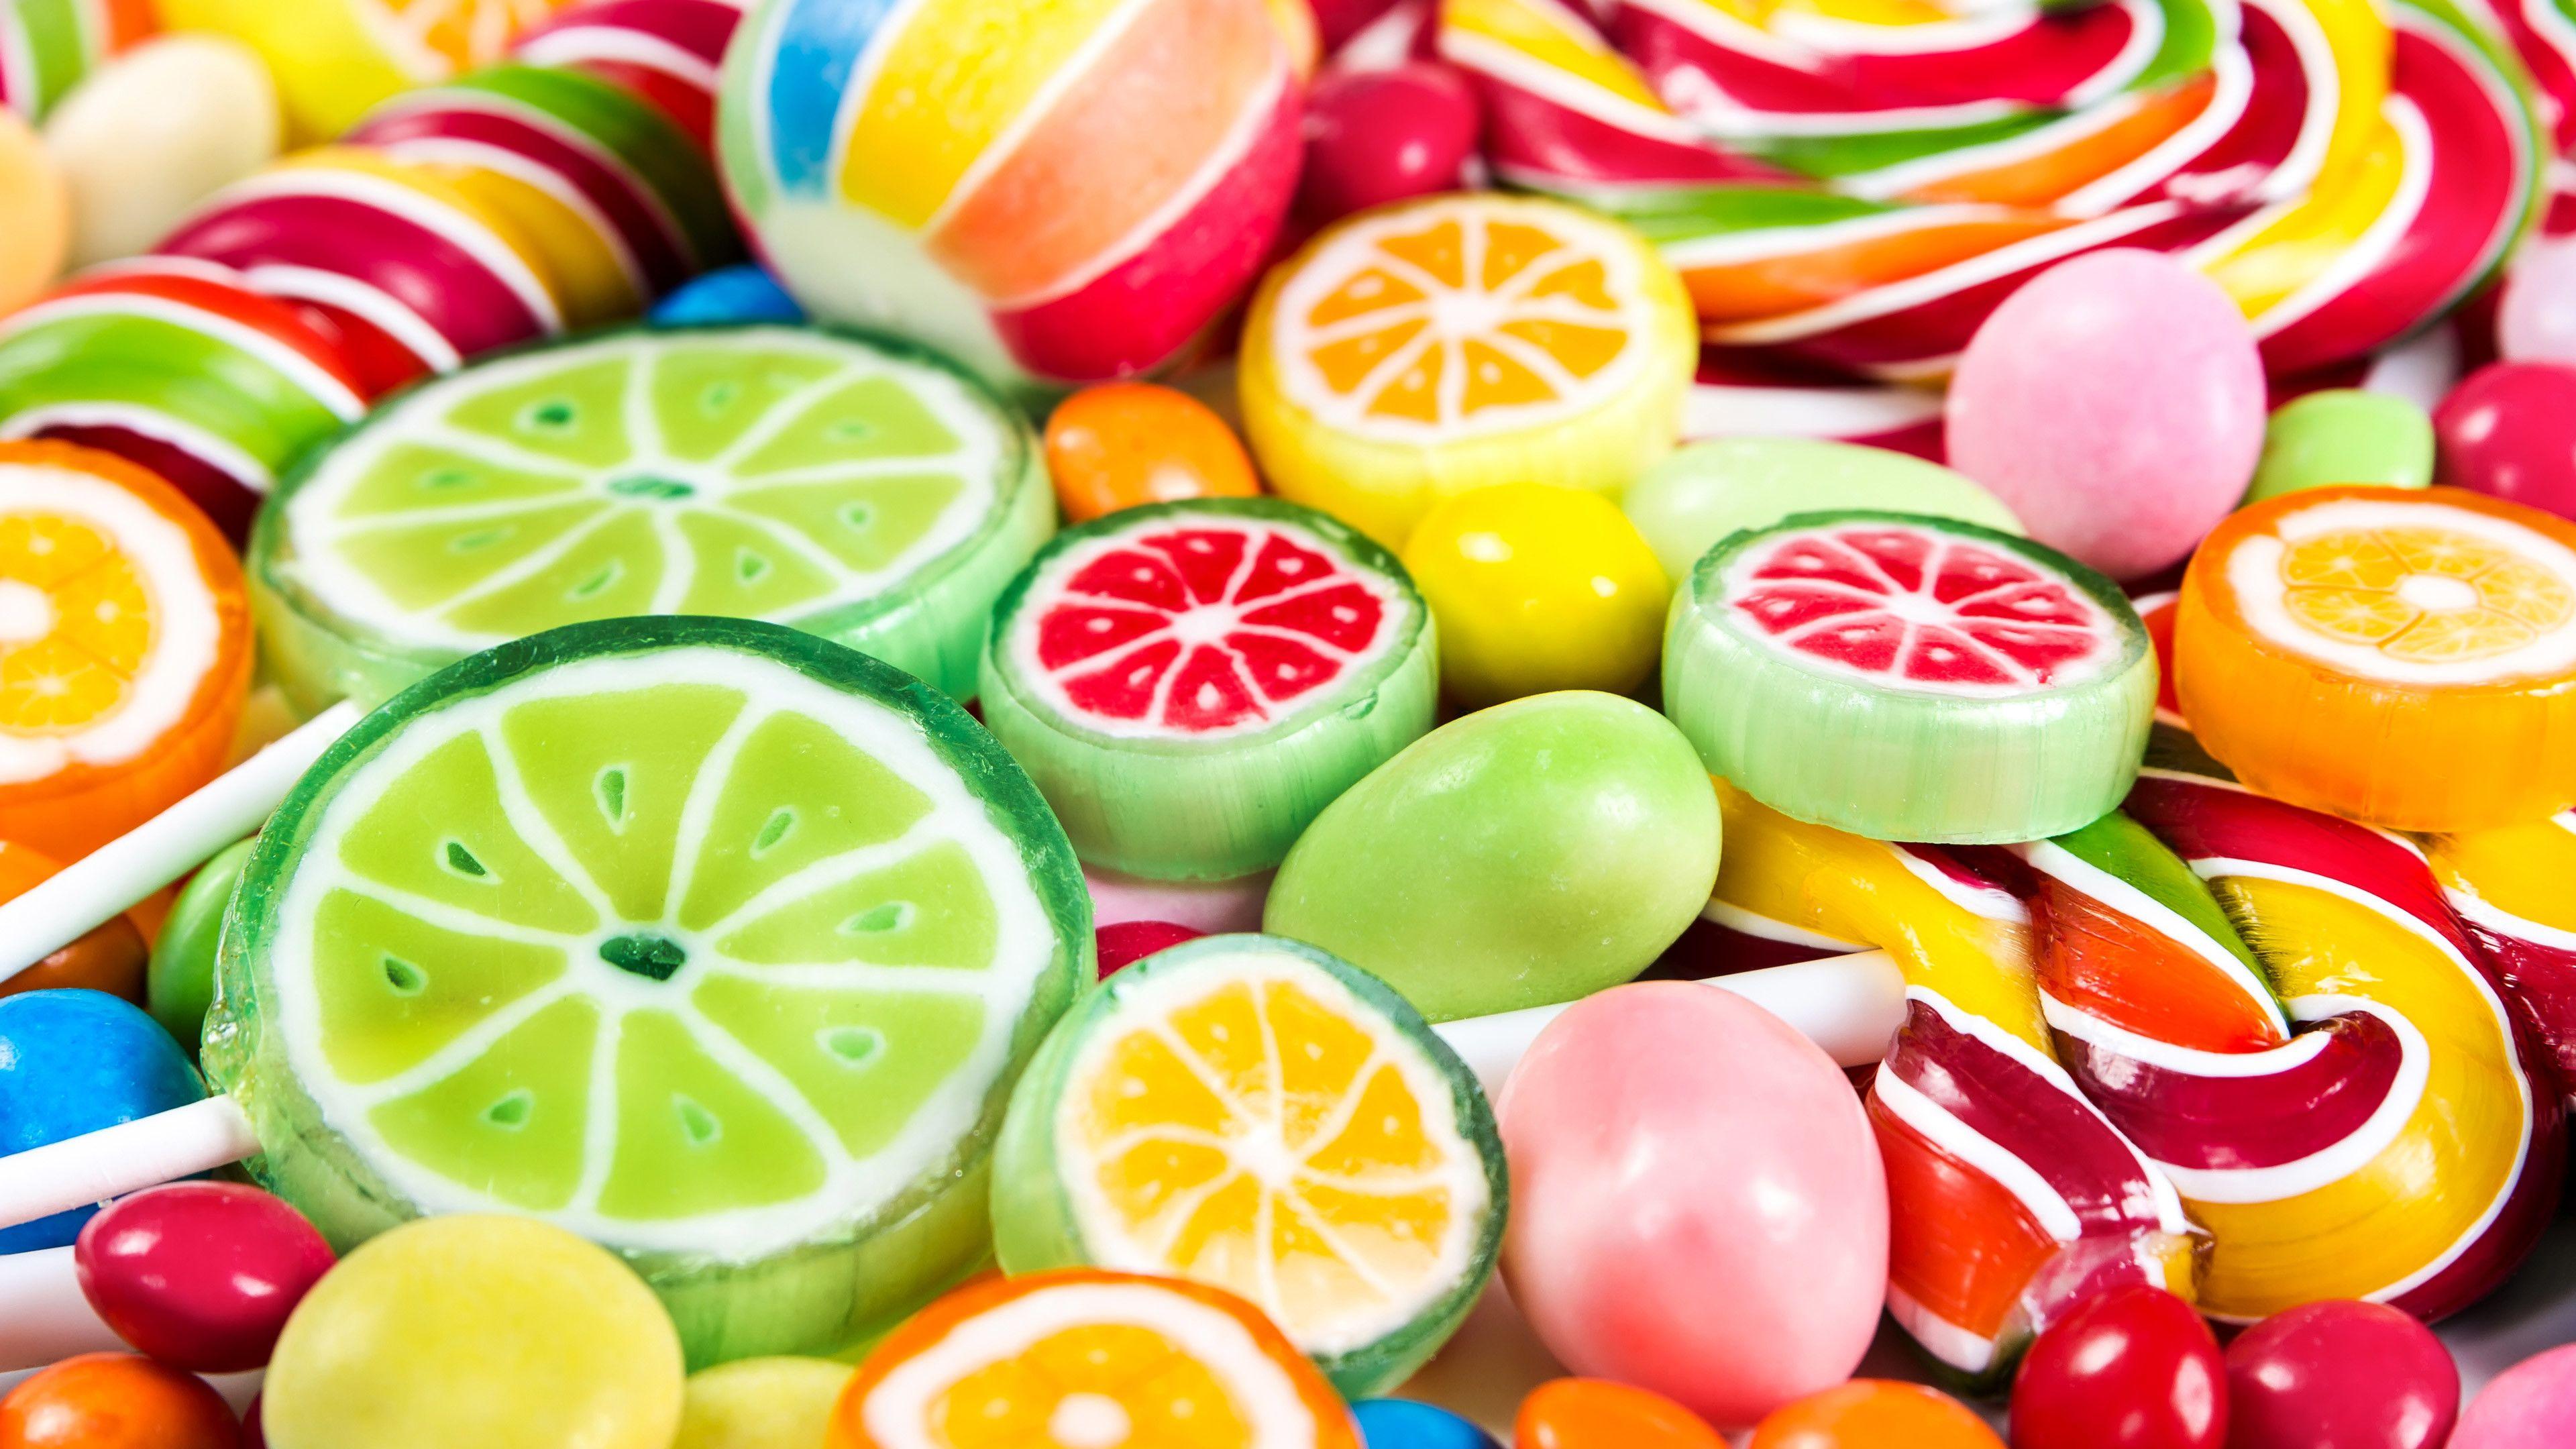 Candy Wallpapers Top Free Candy Backgrounds Wallpaperaccess Images, Photos, Reviews